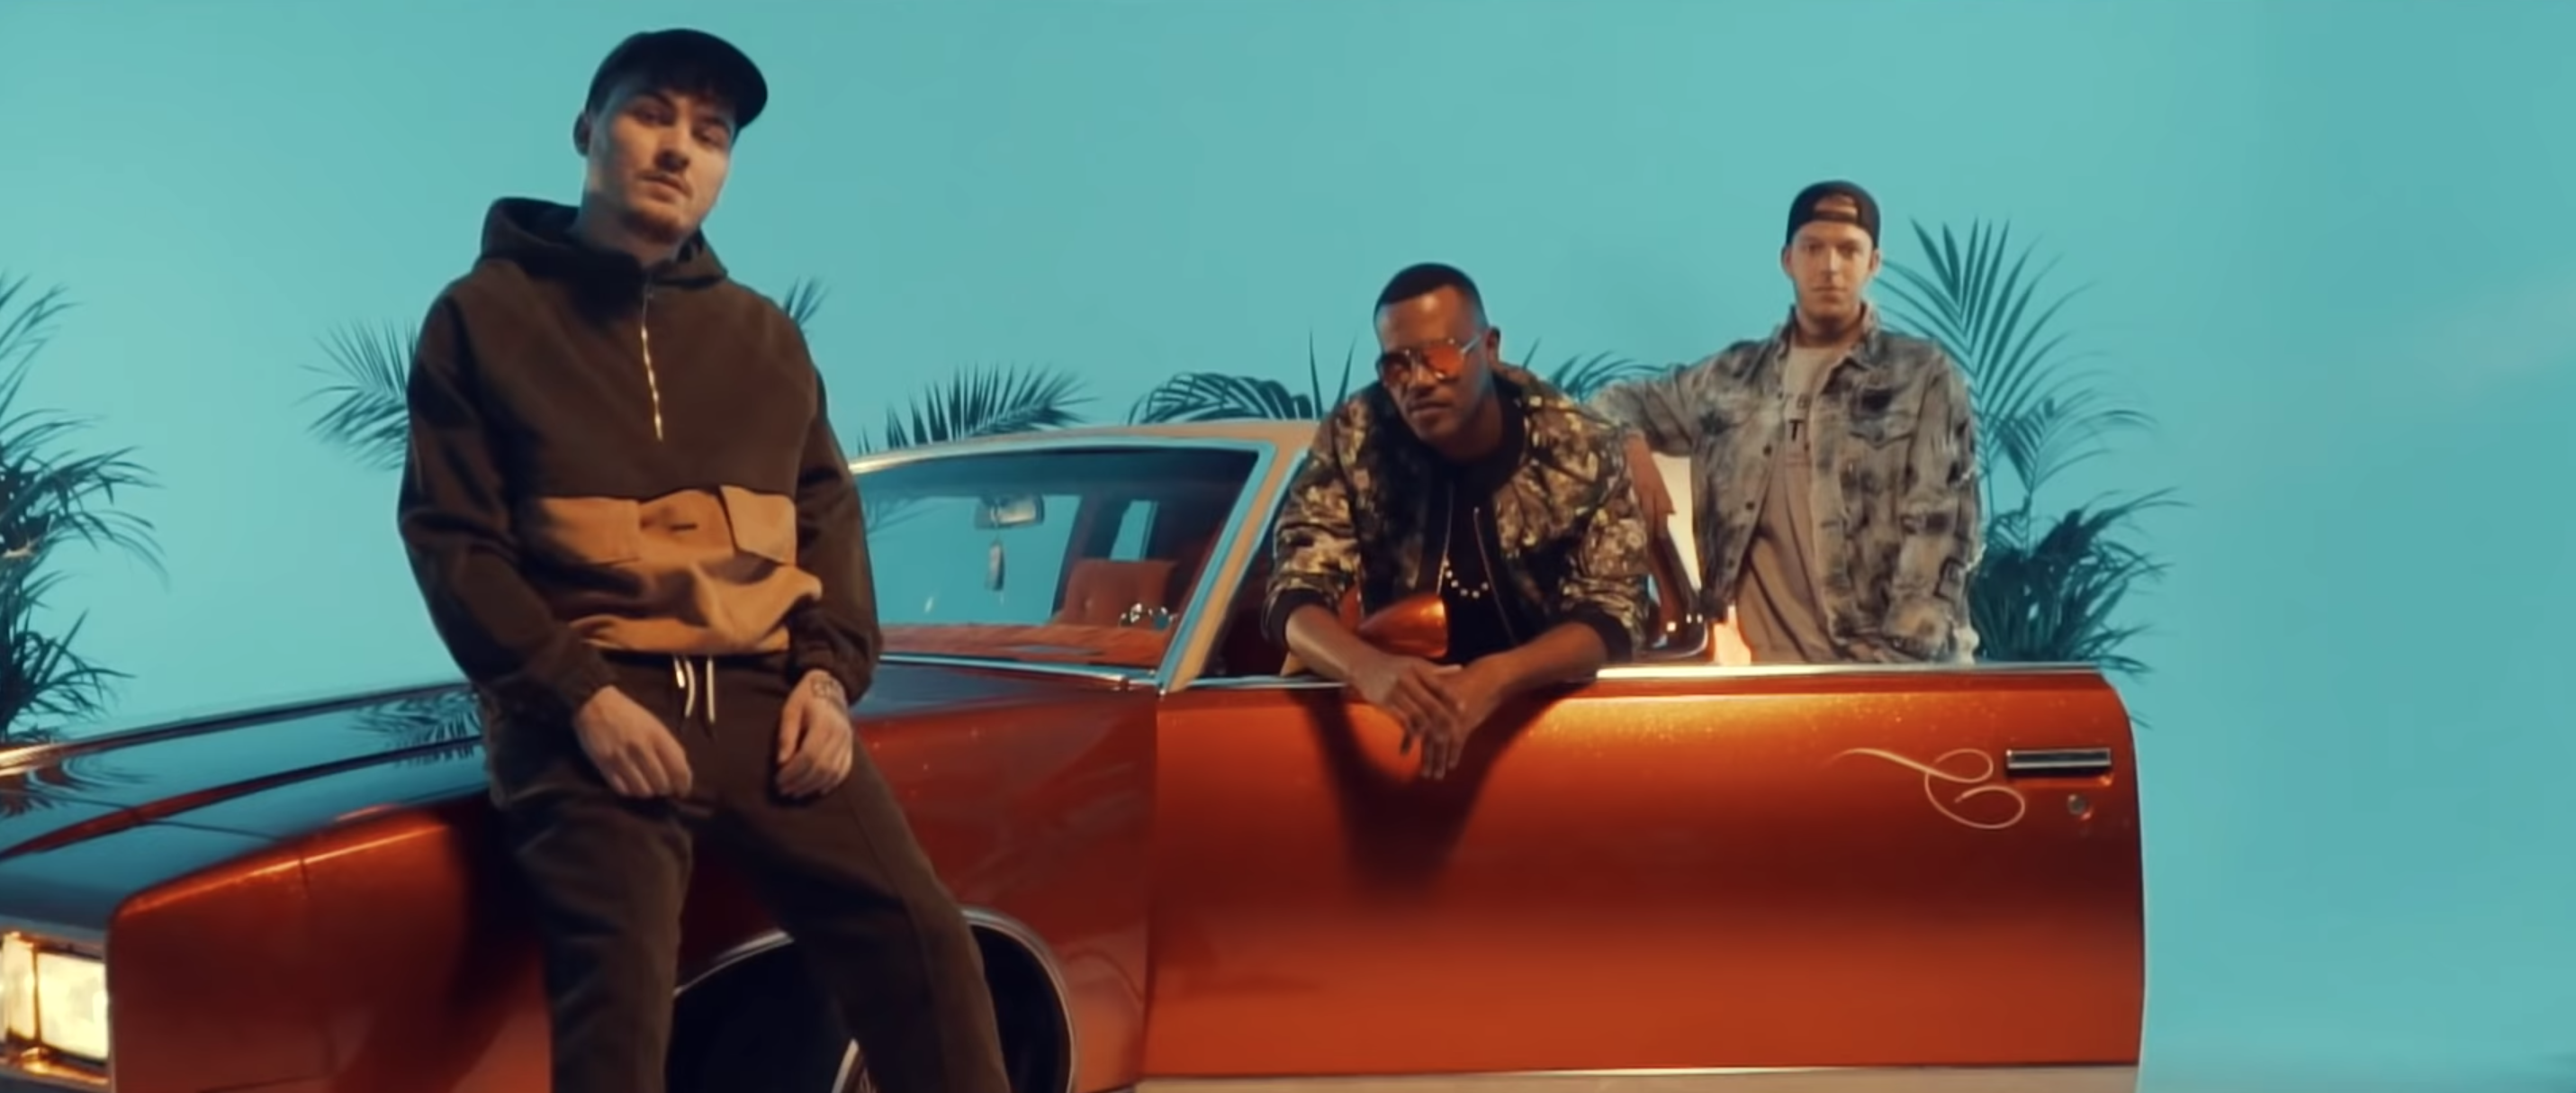 VIDEO: The Boy Next Door teams up with Kevin Lyttle and $hirak